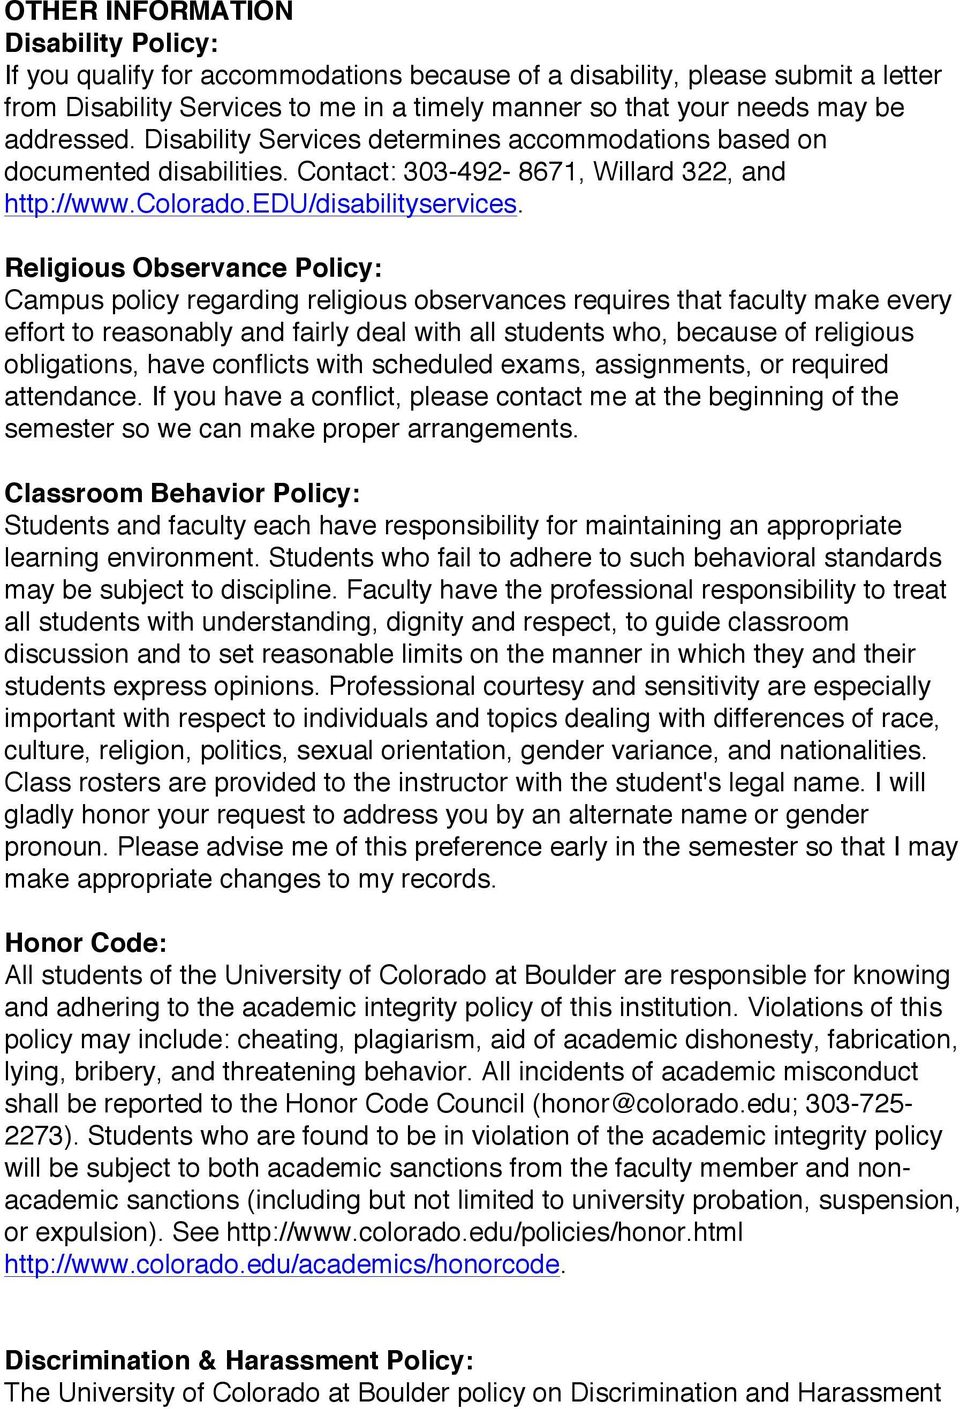 Religious Observance Policy: Campus policy regarding religious observances requires that faculty make every effort to reasonably and fairly deal with all students who, because of religious